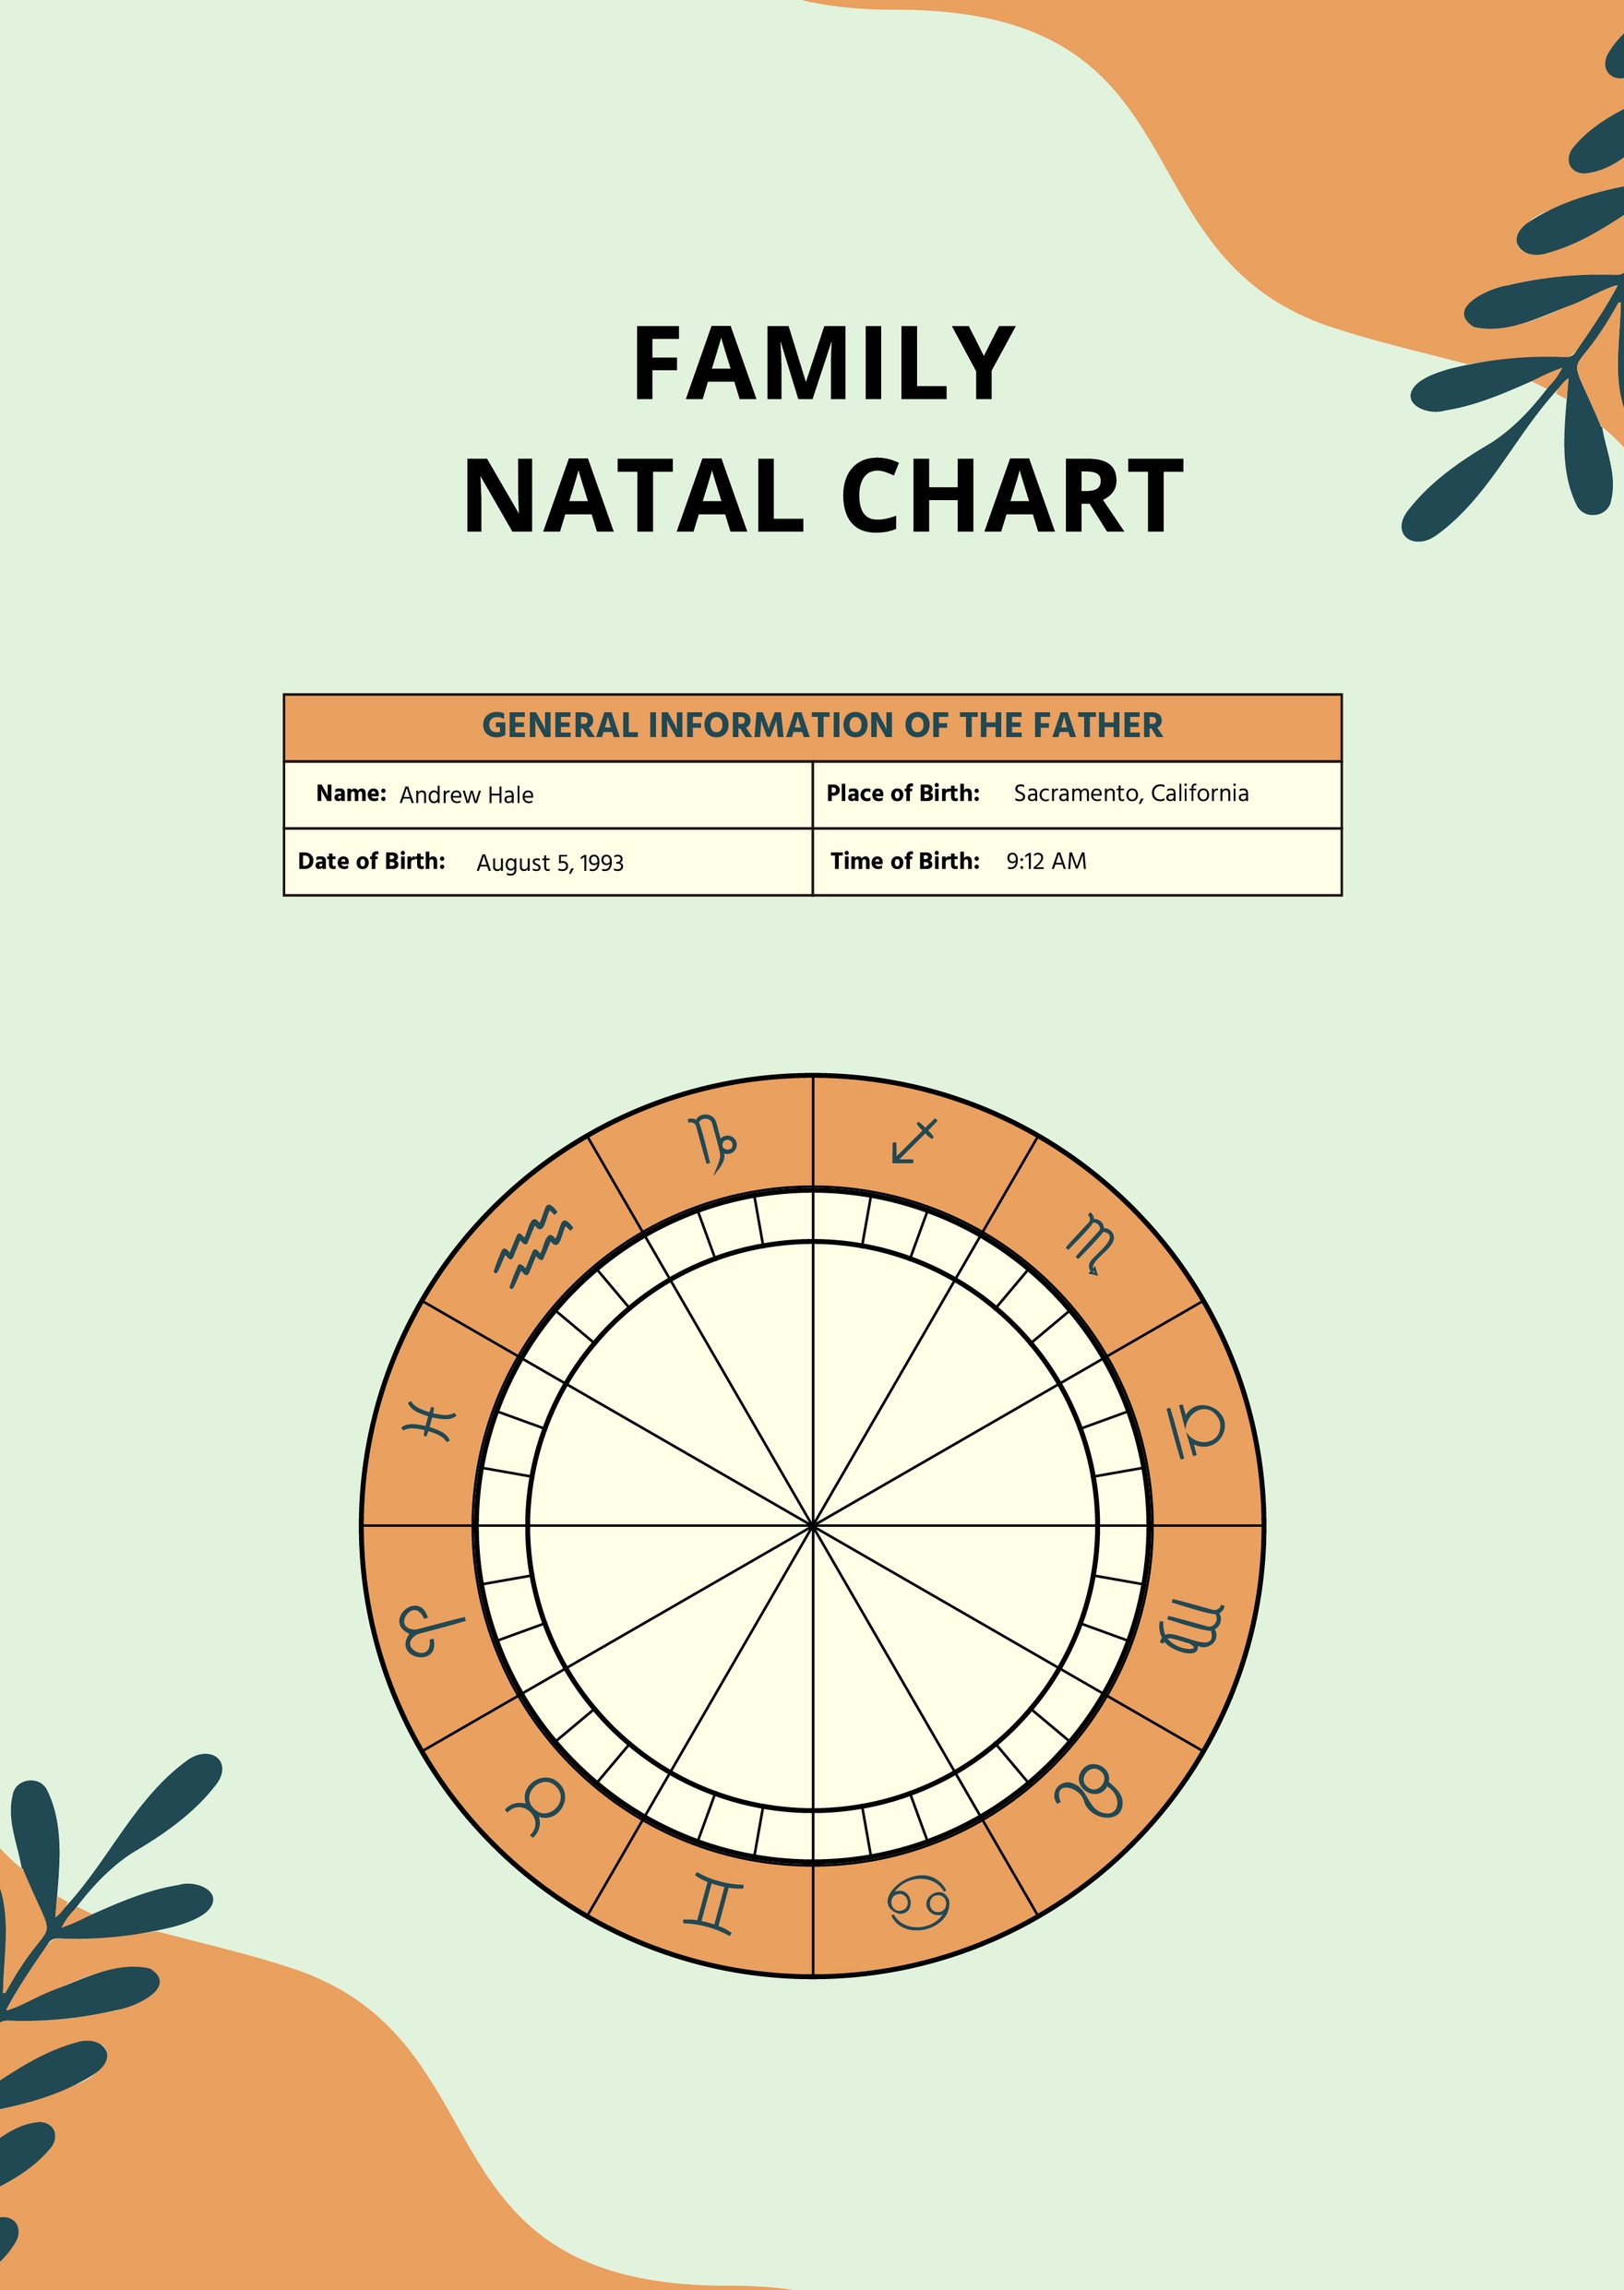 Free Family Natal Chart Template in PDF, Illustrator